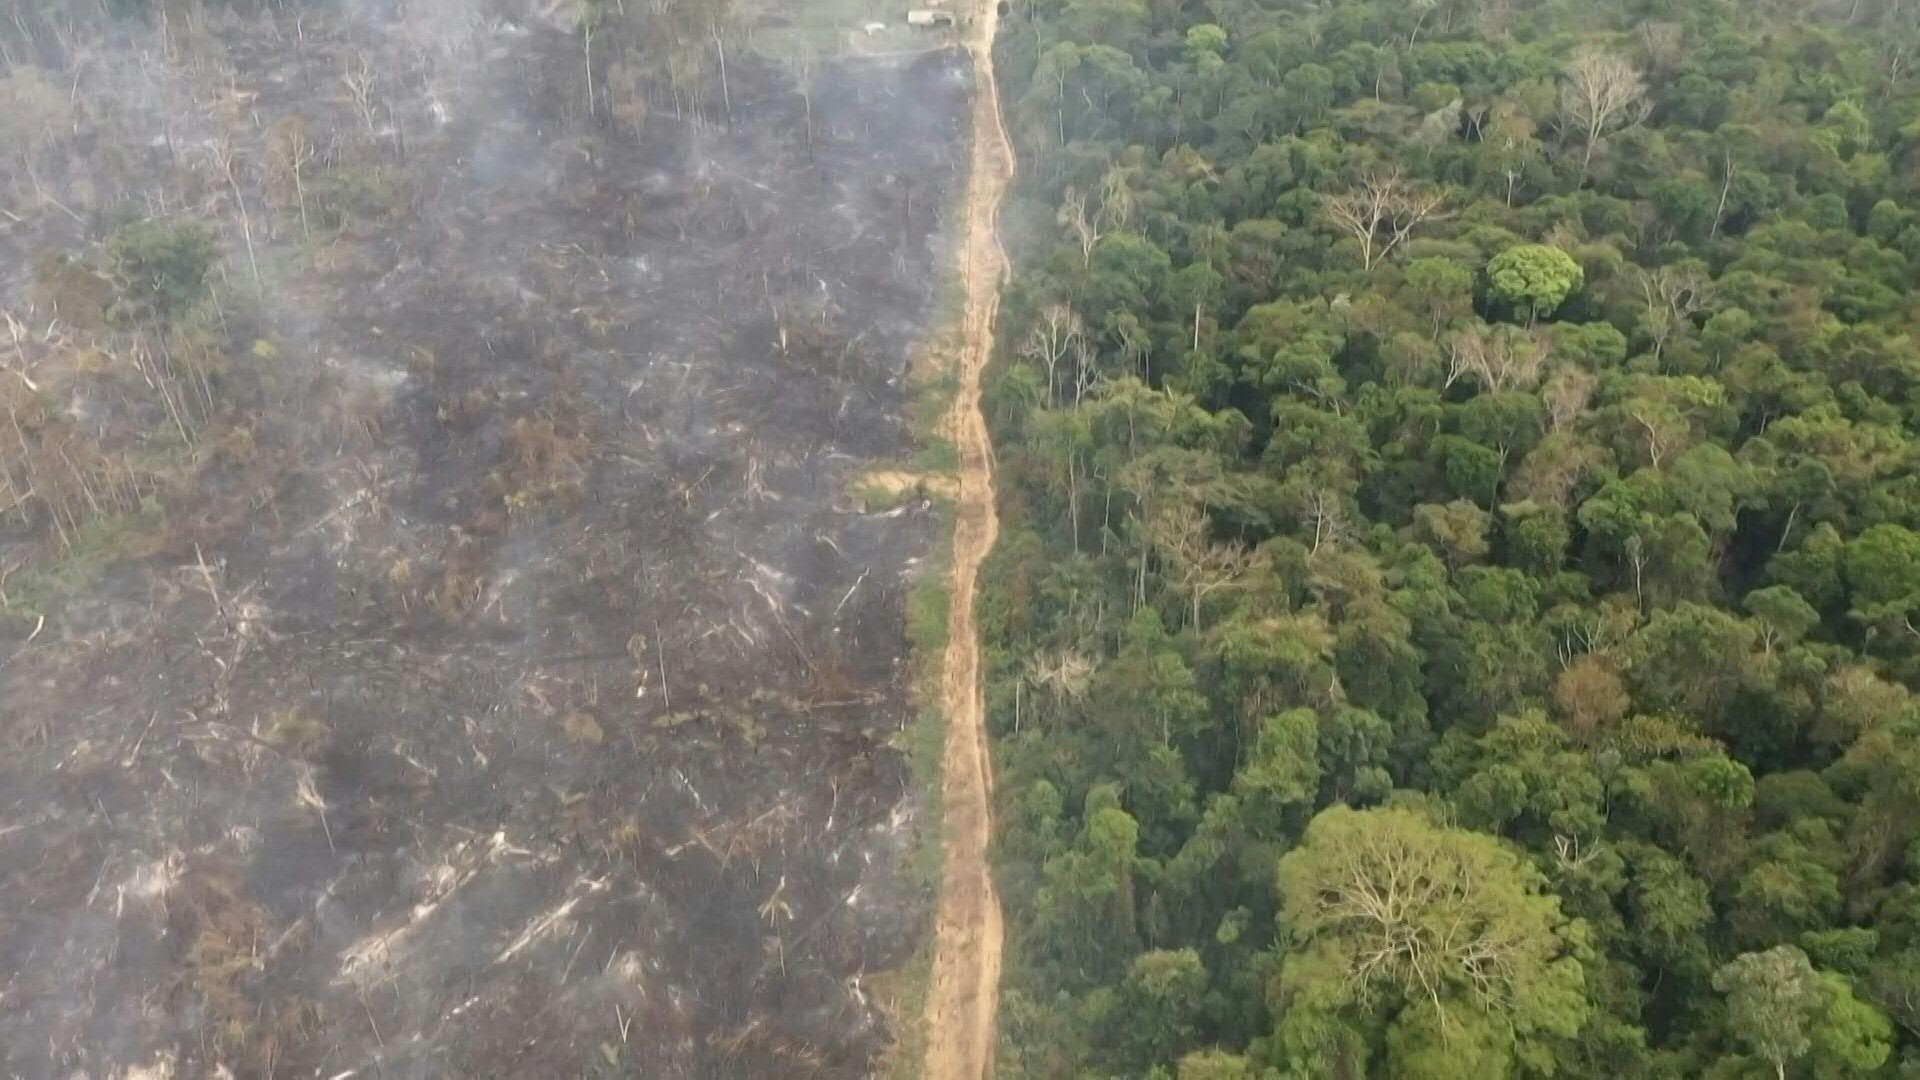 Deforestation in the Brazilian Amazon has reached a new record for the month of April, with more than 1,000 km2 cut down, the equivalent of nearly 140,000 football fields, according to satellite data released on Friday.